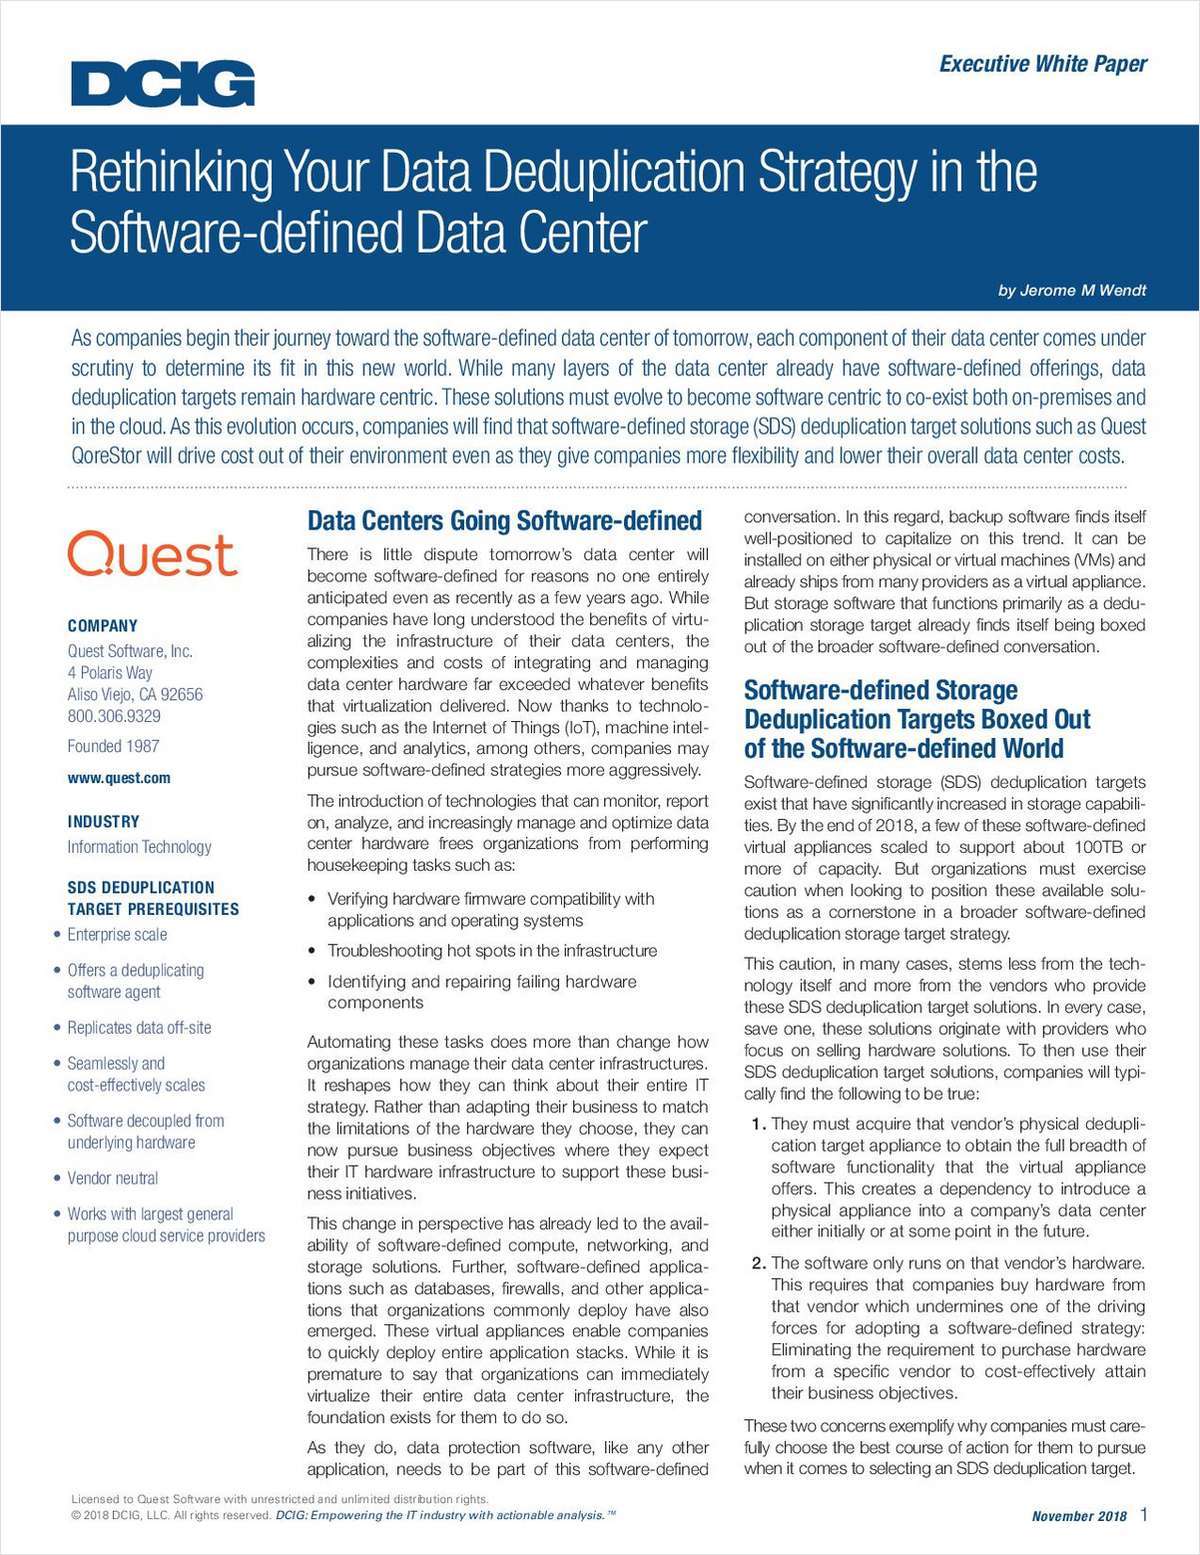 Rethinking Your Data Deduplication Strategy in the Software-defined Data Center